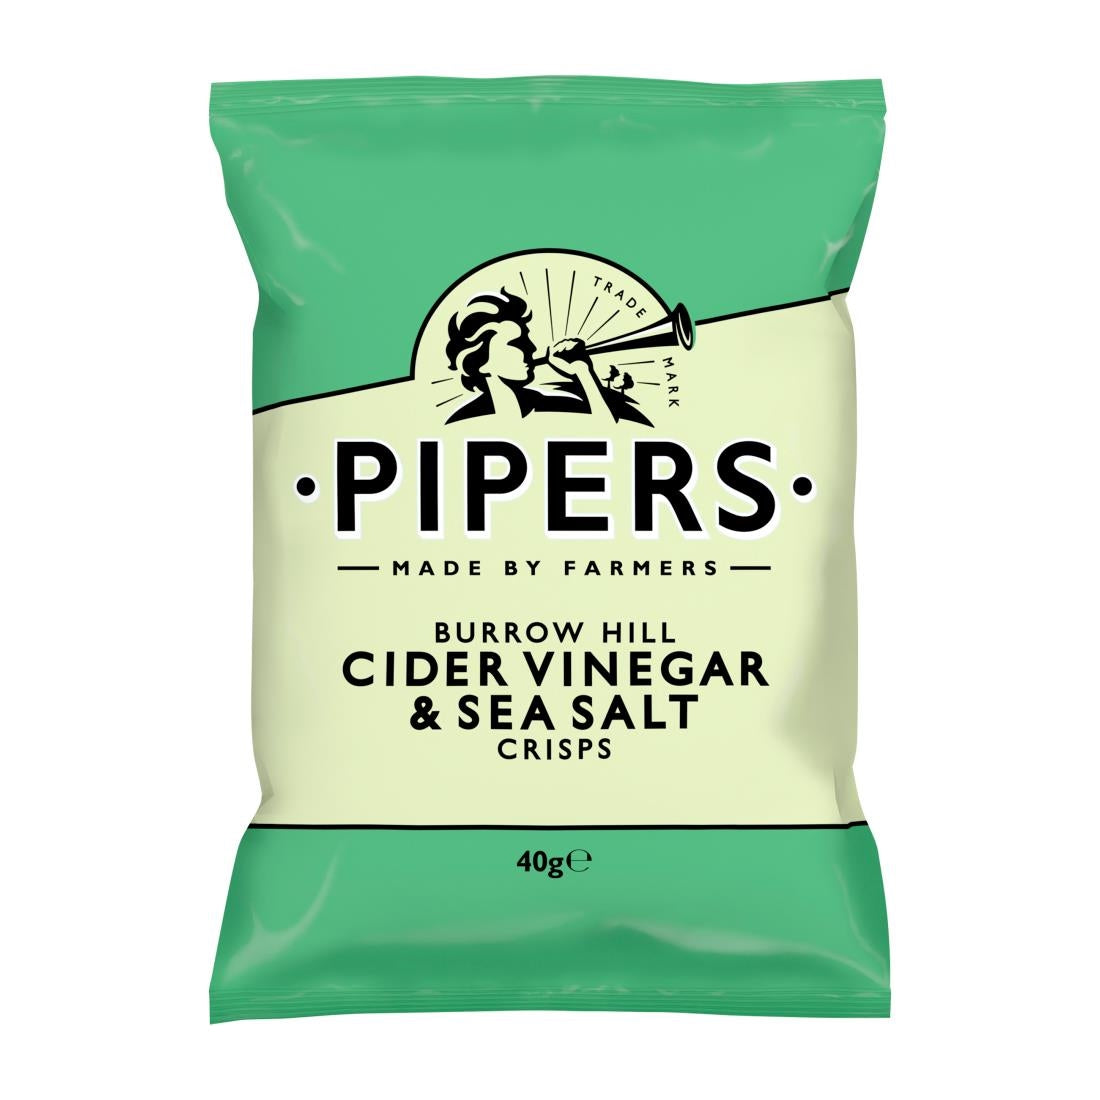 CZ702 Pipers Burrow Hill Cider Vinegar & Sea Salt 40g (Pack of 24) JD Catering Equipment Solutions Ltd